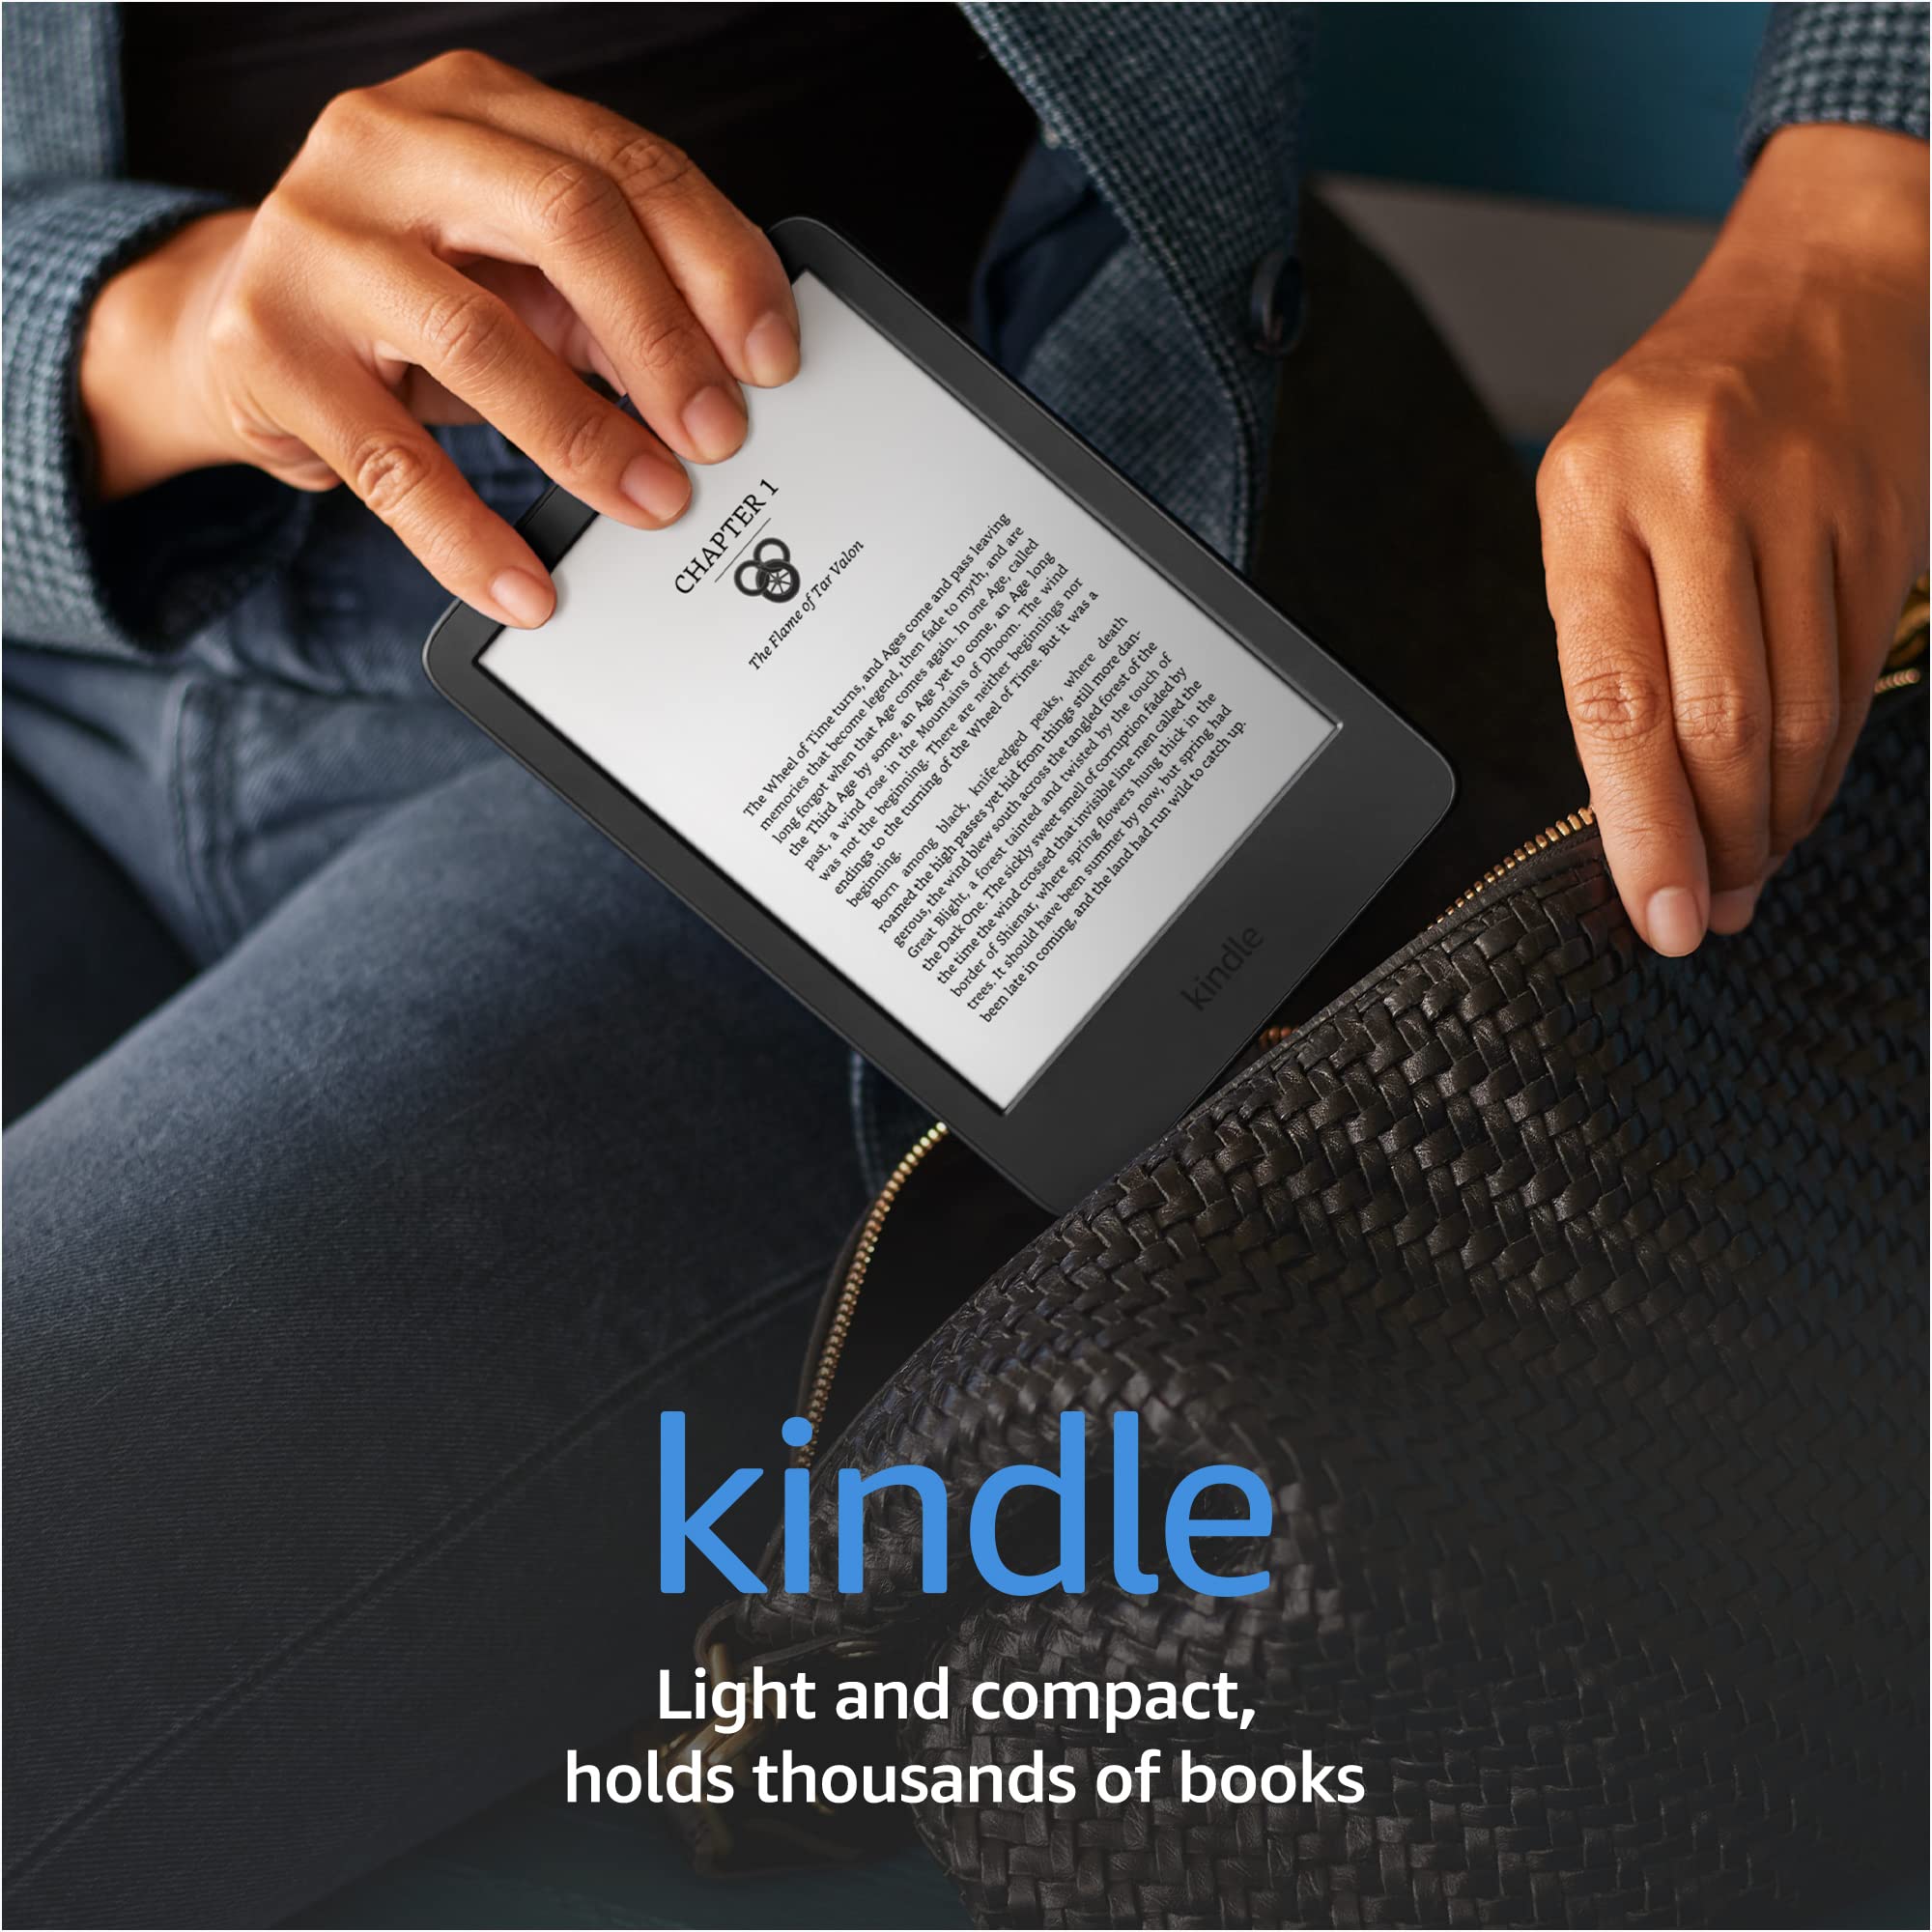 Kindle (2022 release) – The lightest and most compact Kindle, up to 6 weeks of battery life, glare-free display with adjustable front light, and 16 GB storage – Without Lockscreen Ads - Black